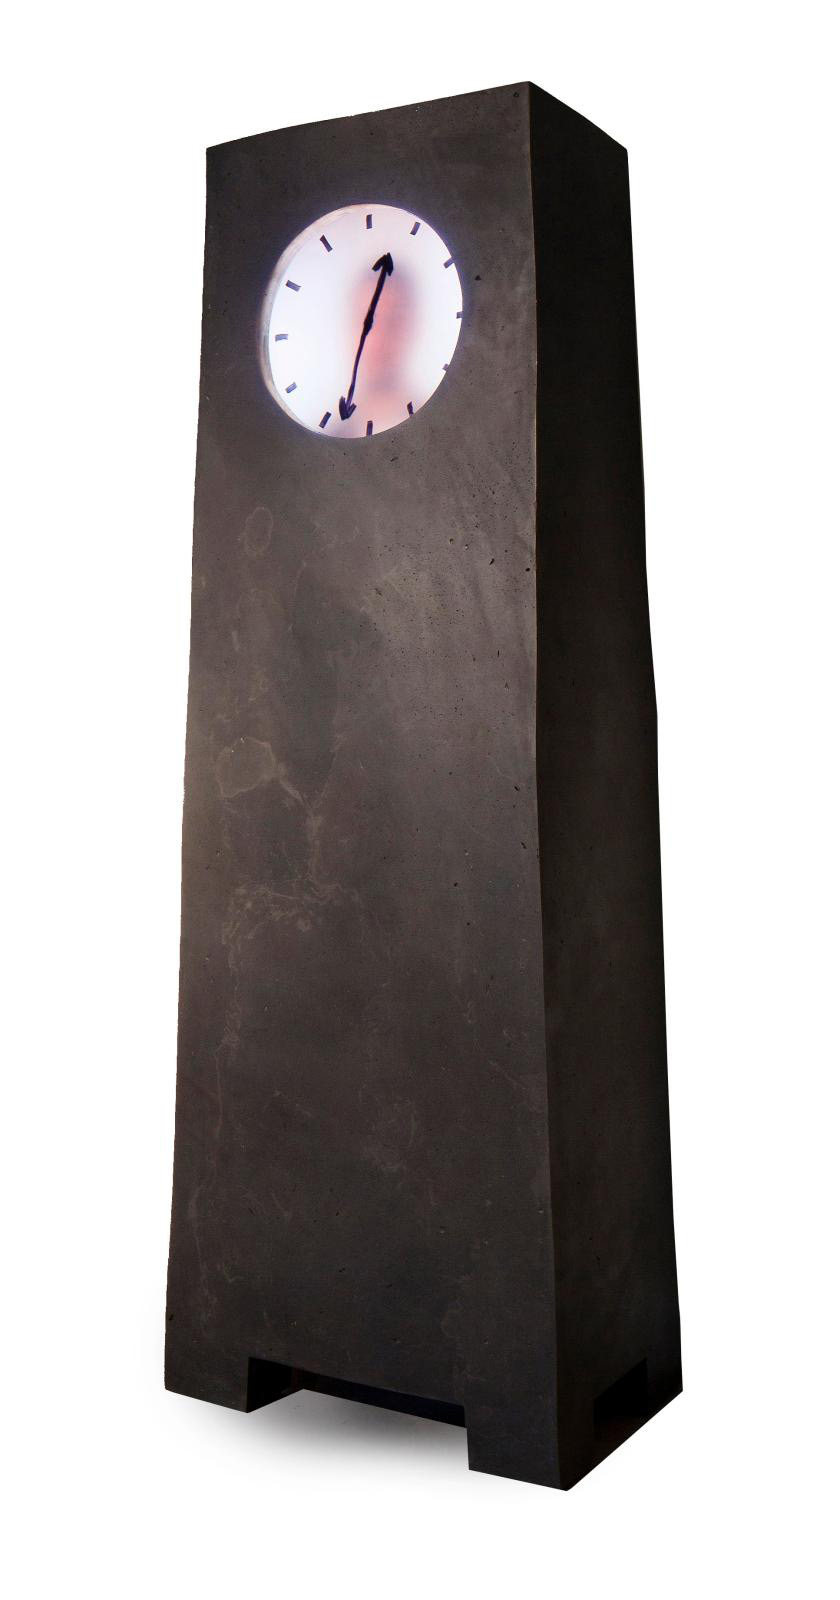 Maarten Baas (b. 1978), Grandfather Clock, 2009, purchased in 2012.© MAD, Paris/Luc Boegly